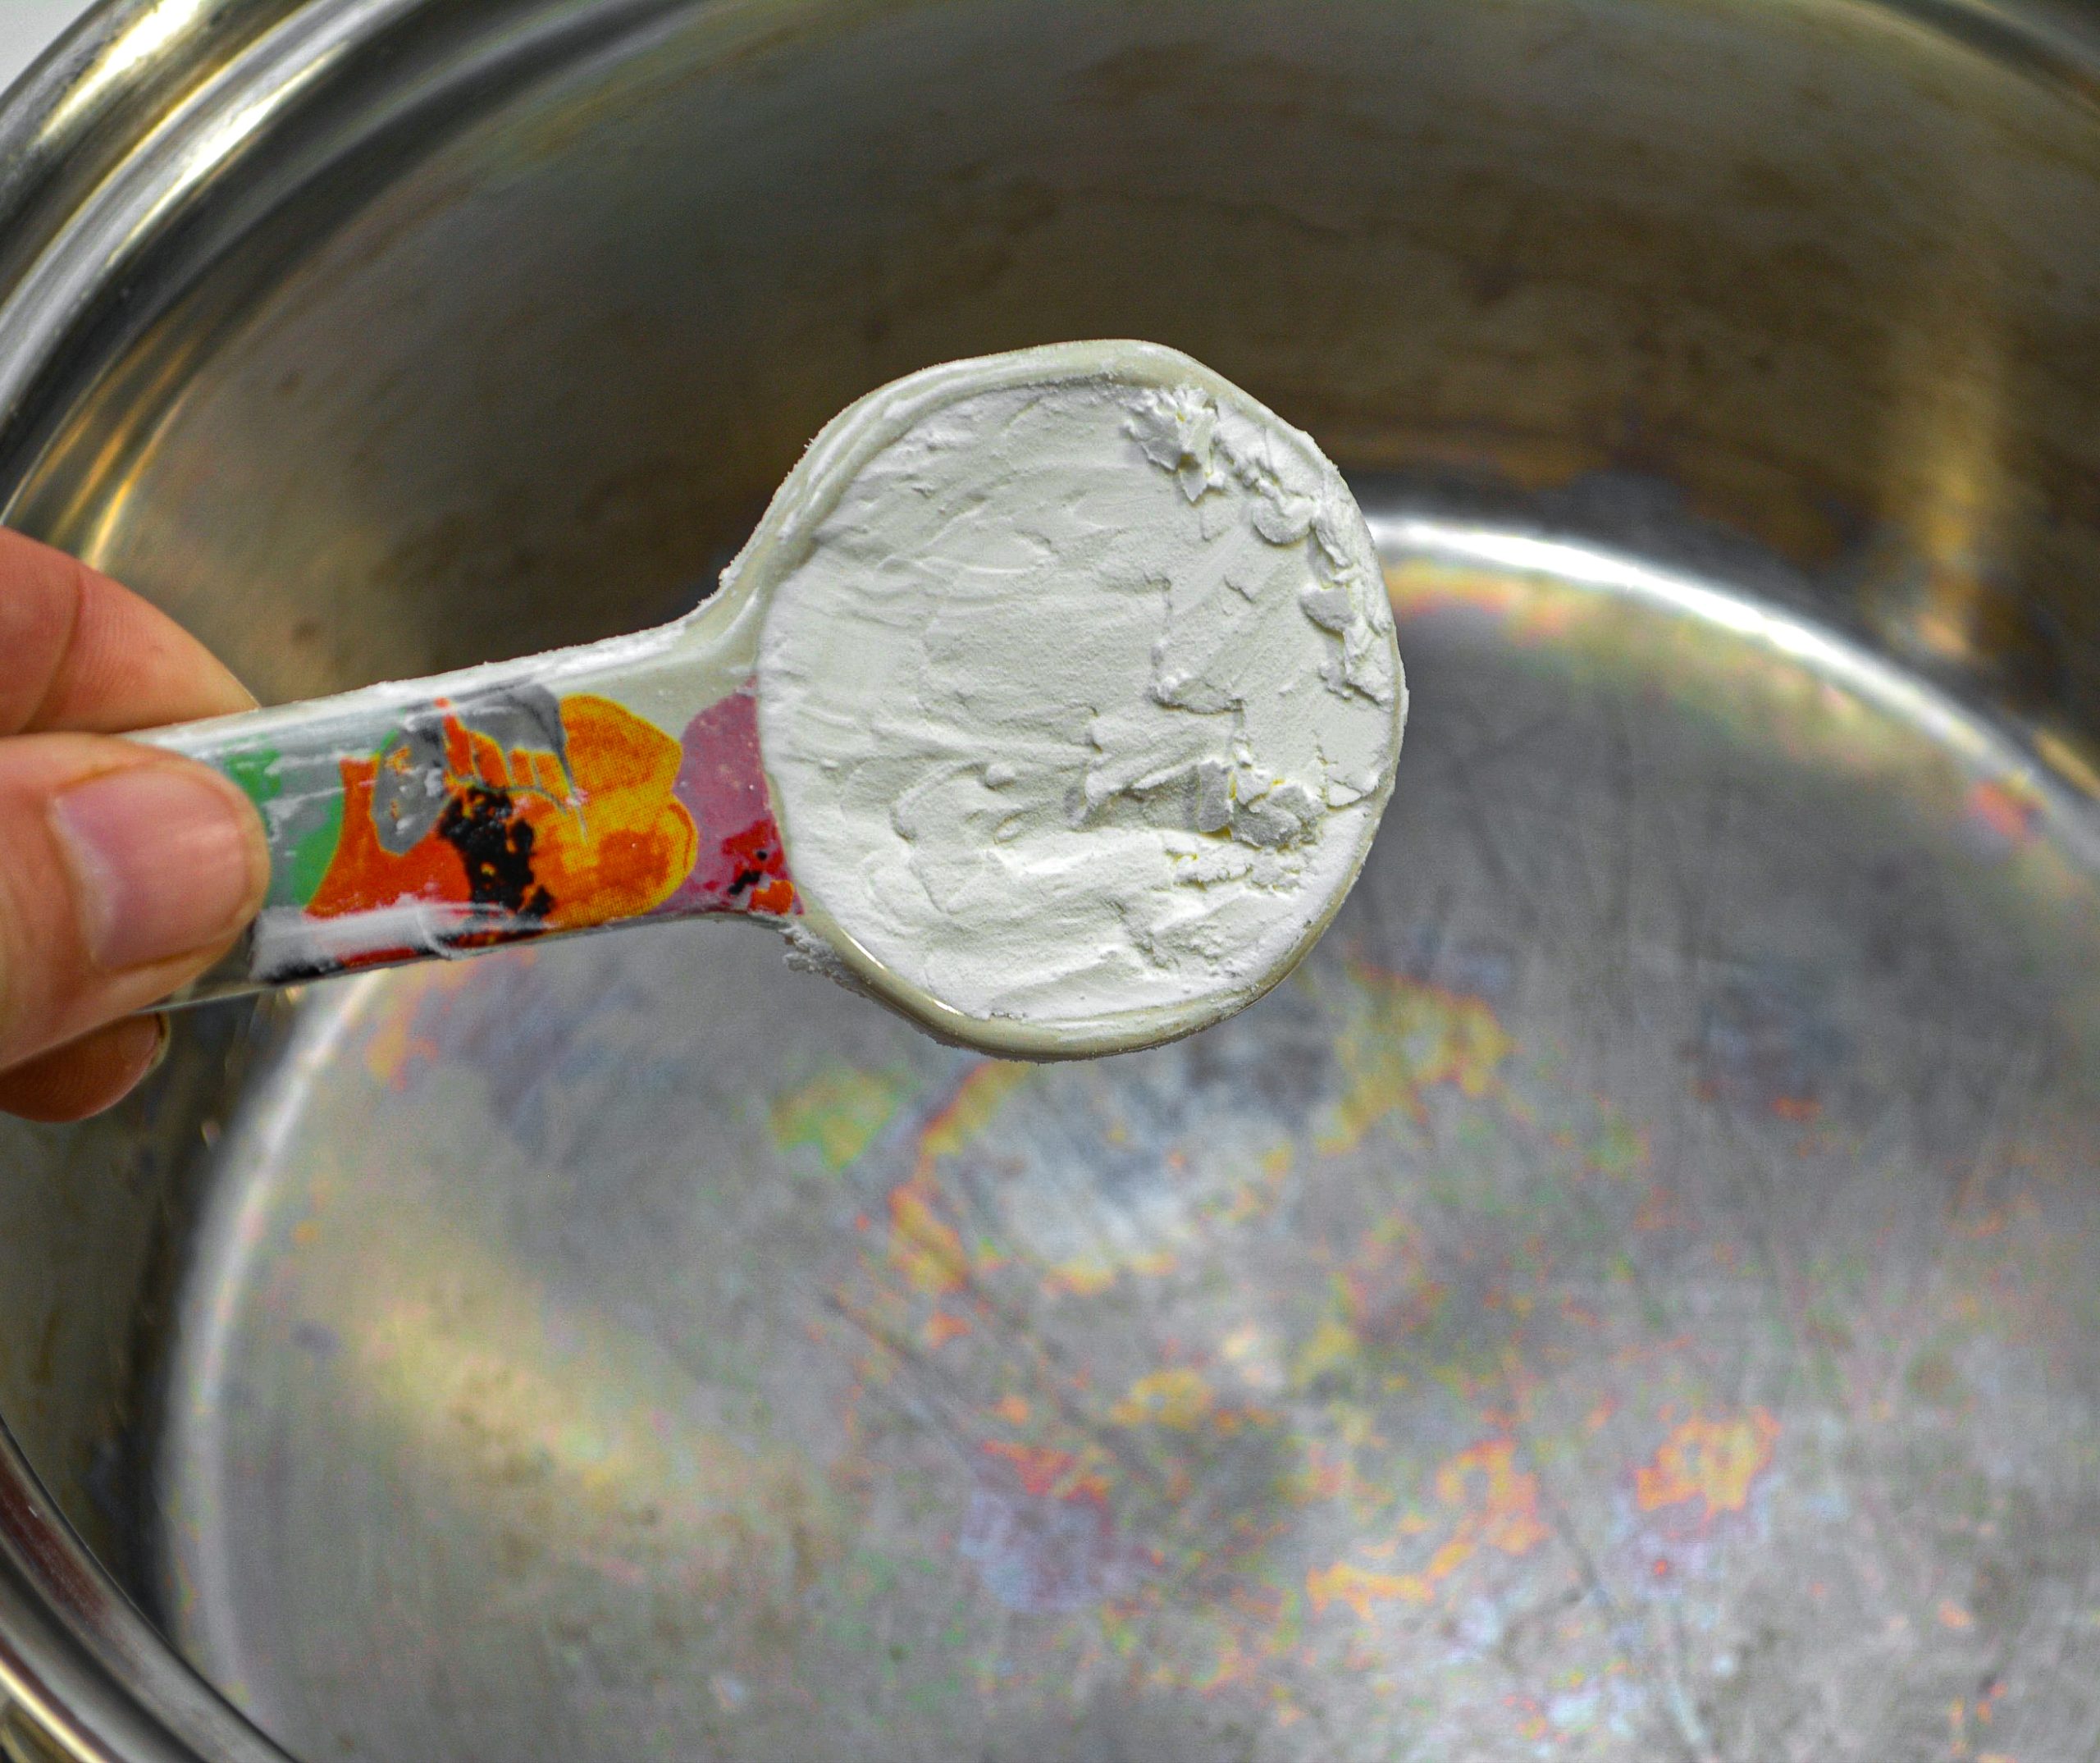 In a pot, add in 1 tablespoon of cornstarch.